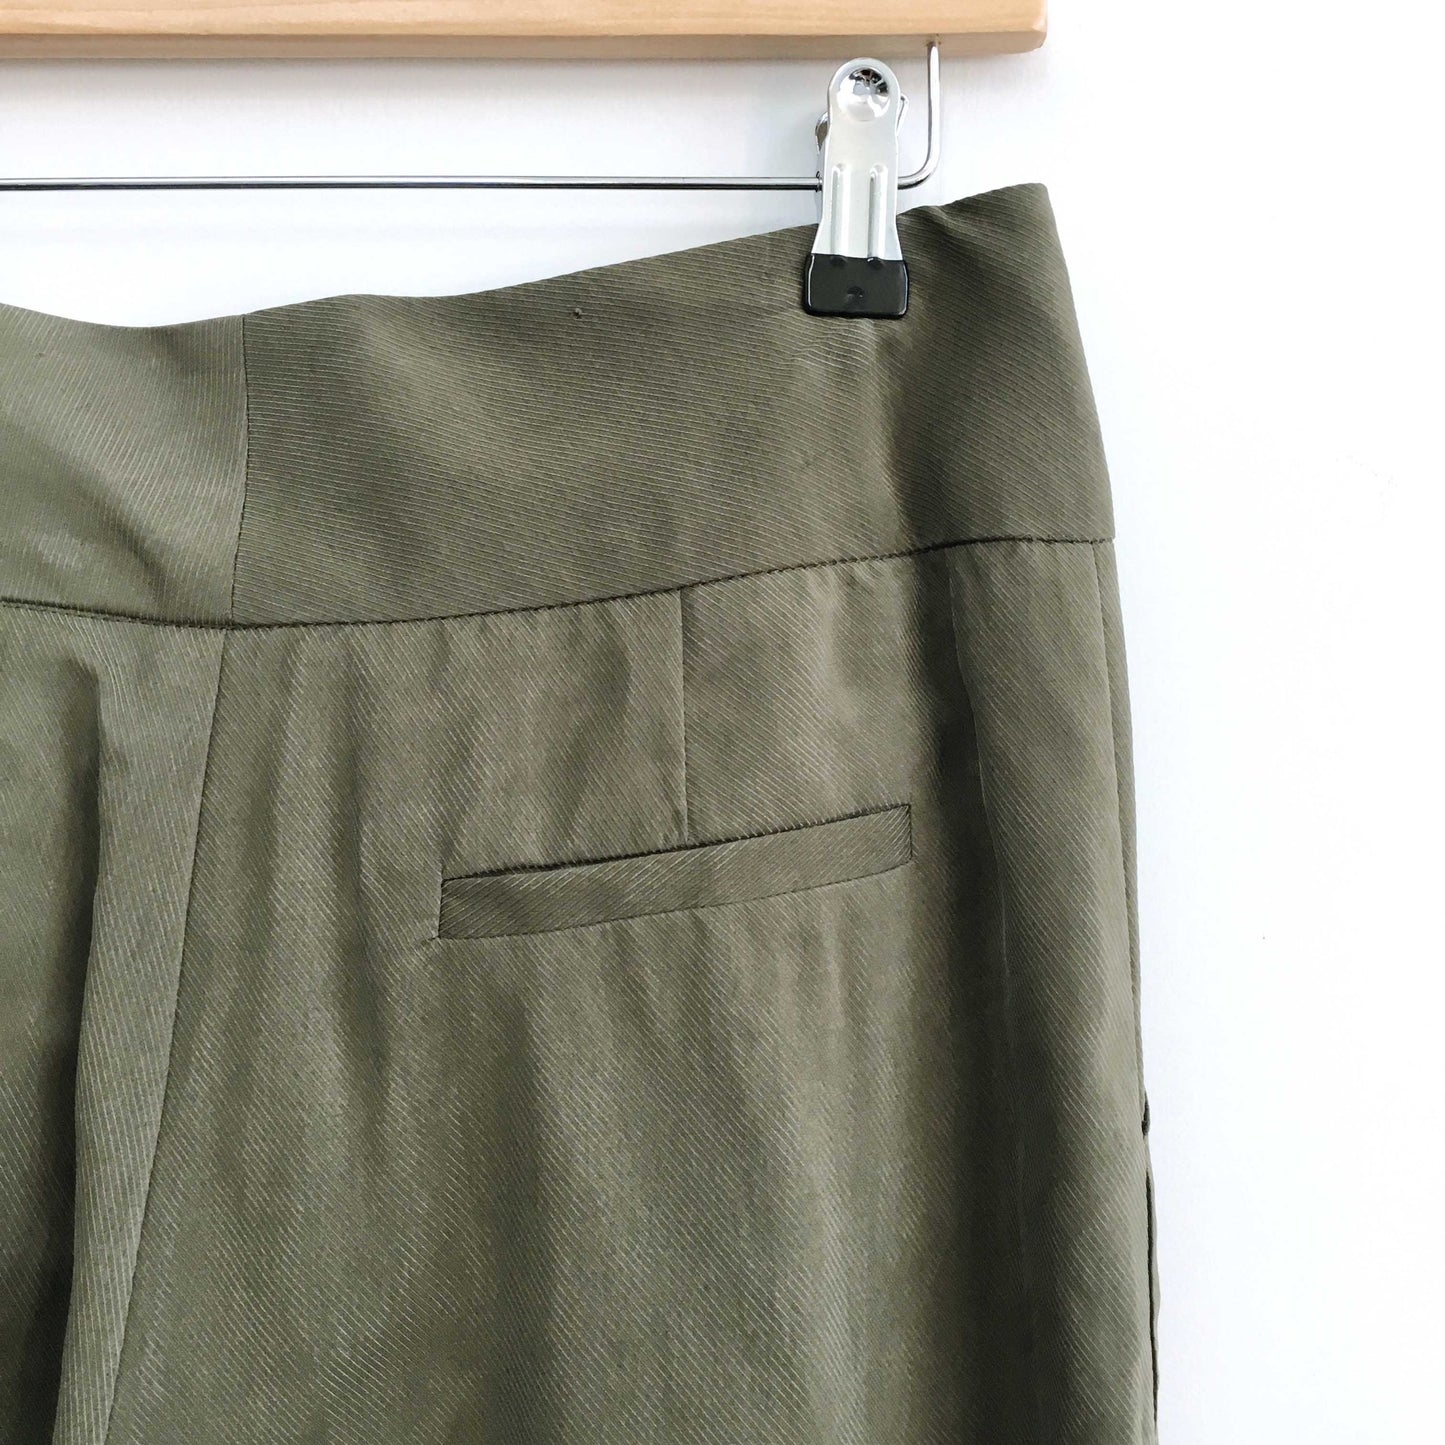 Anthropologie Wide Leg Trousers - size 6